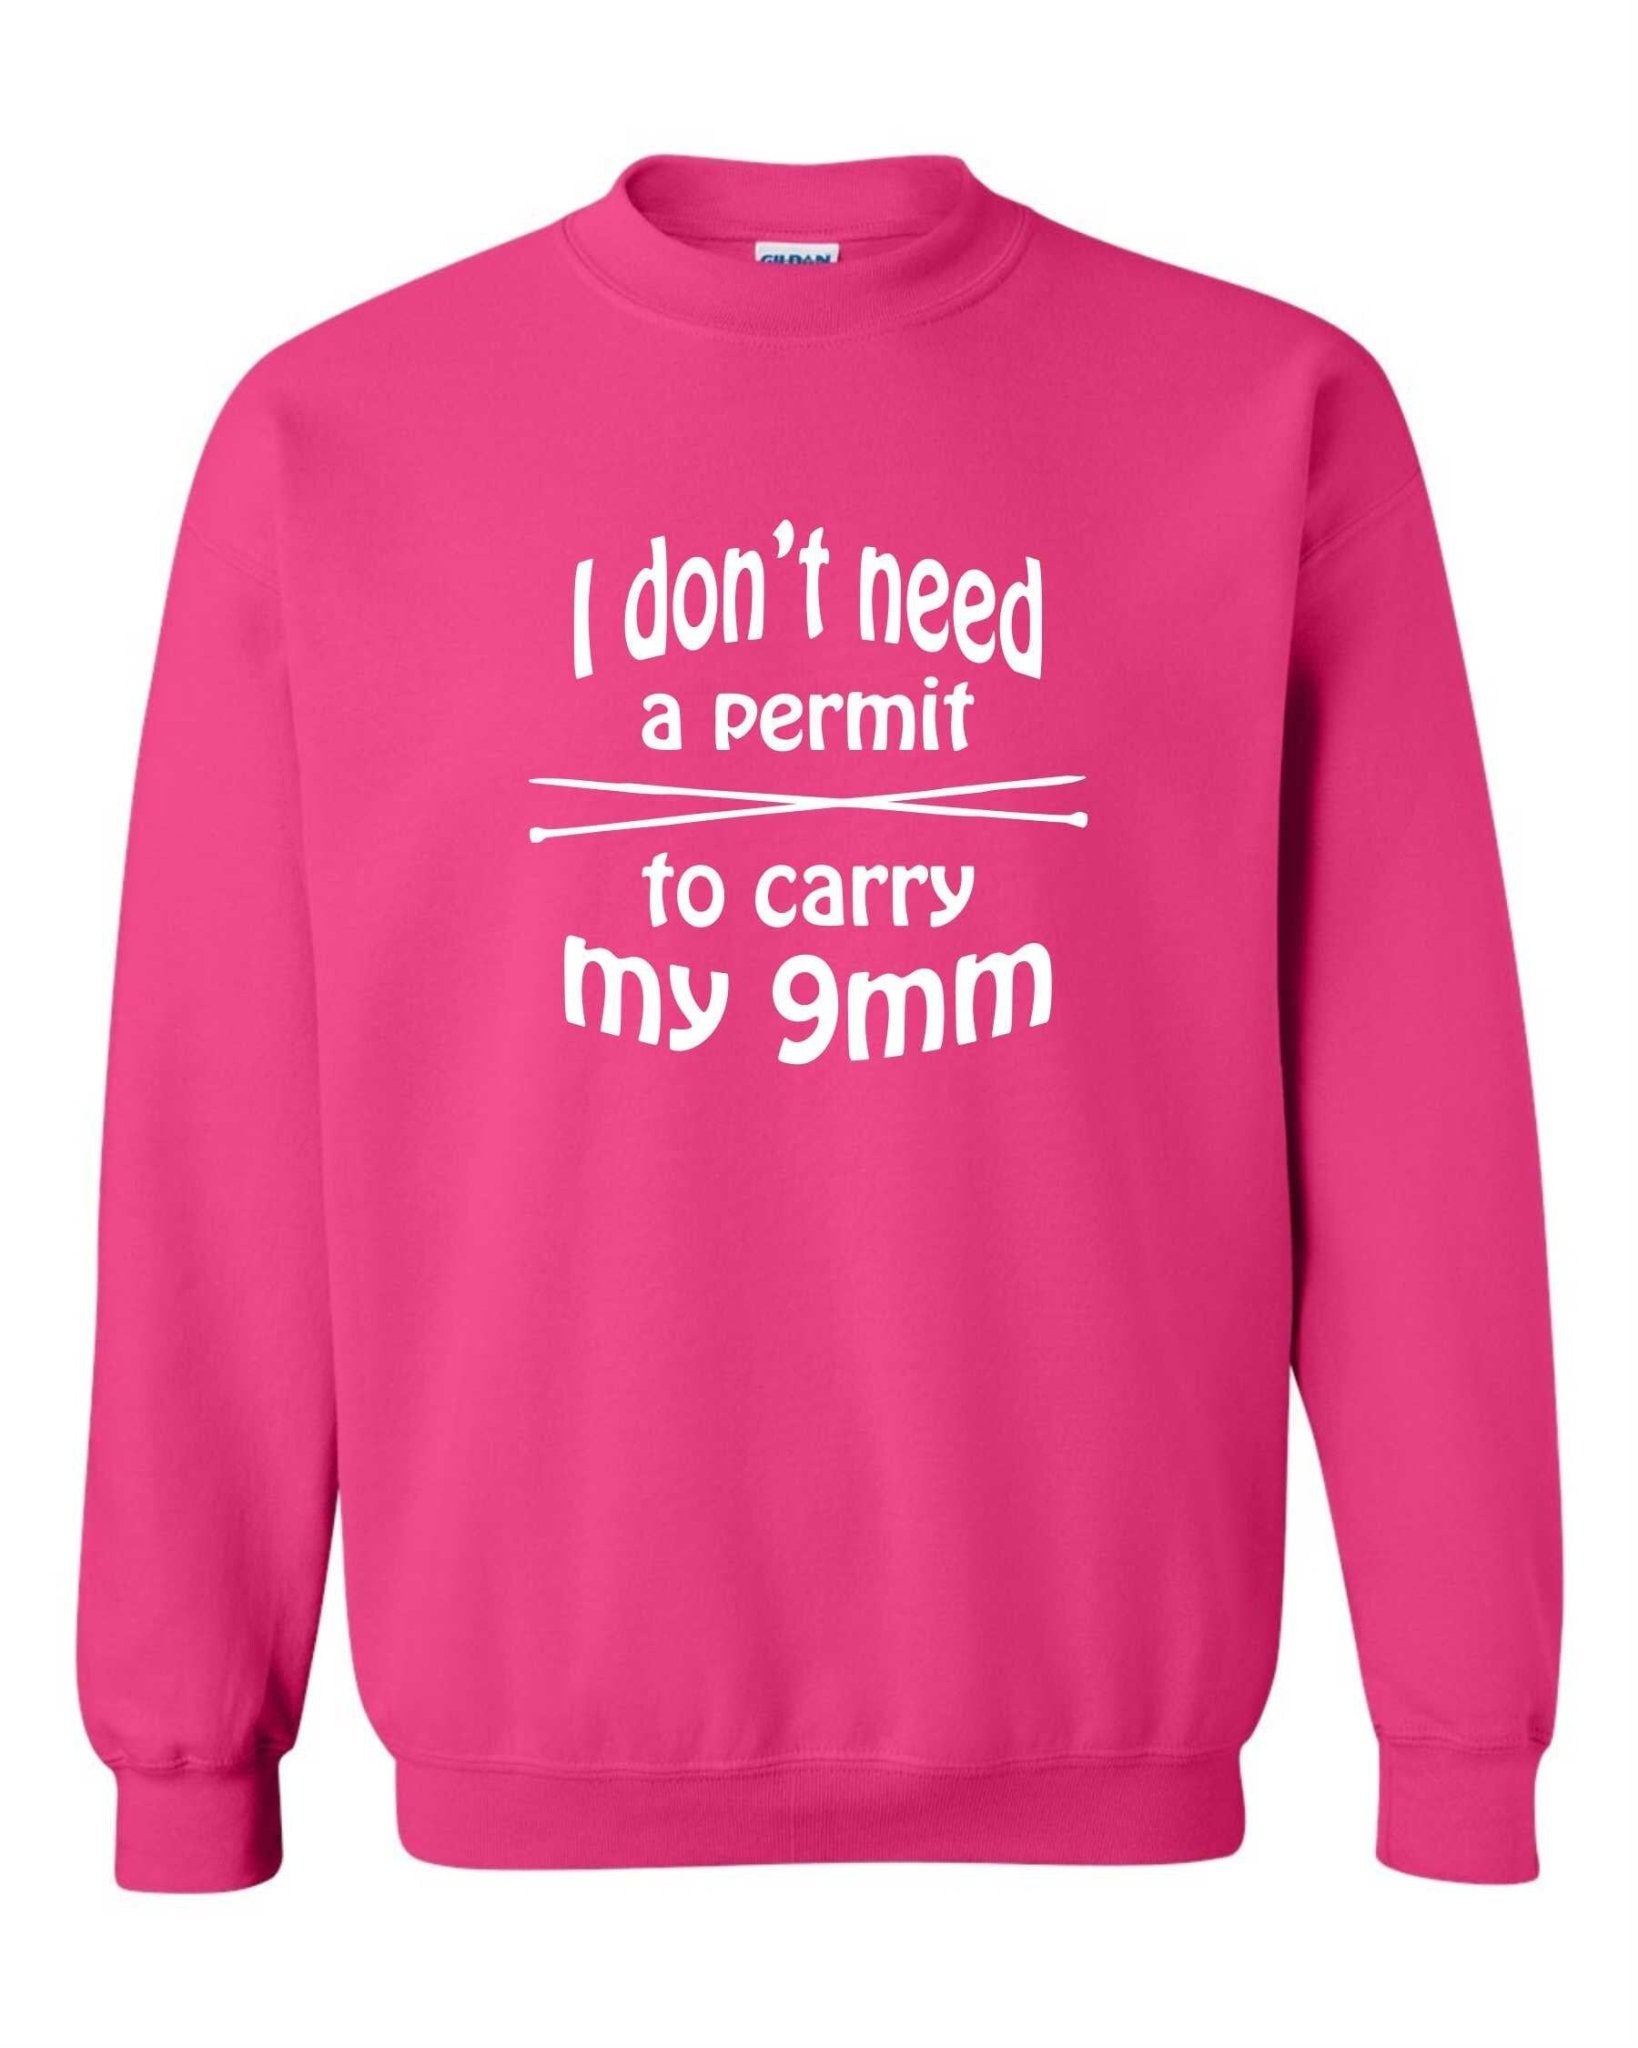 Knitting sweatshirt, Grandma Sweater I don't need a permit to carry my 9mm shirt, Knit humor gift for her hard to buy for present - SBS T Shop